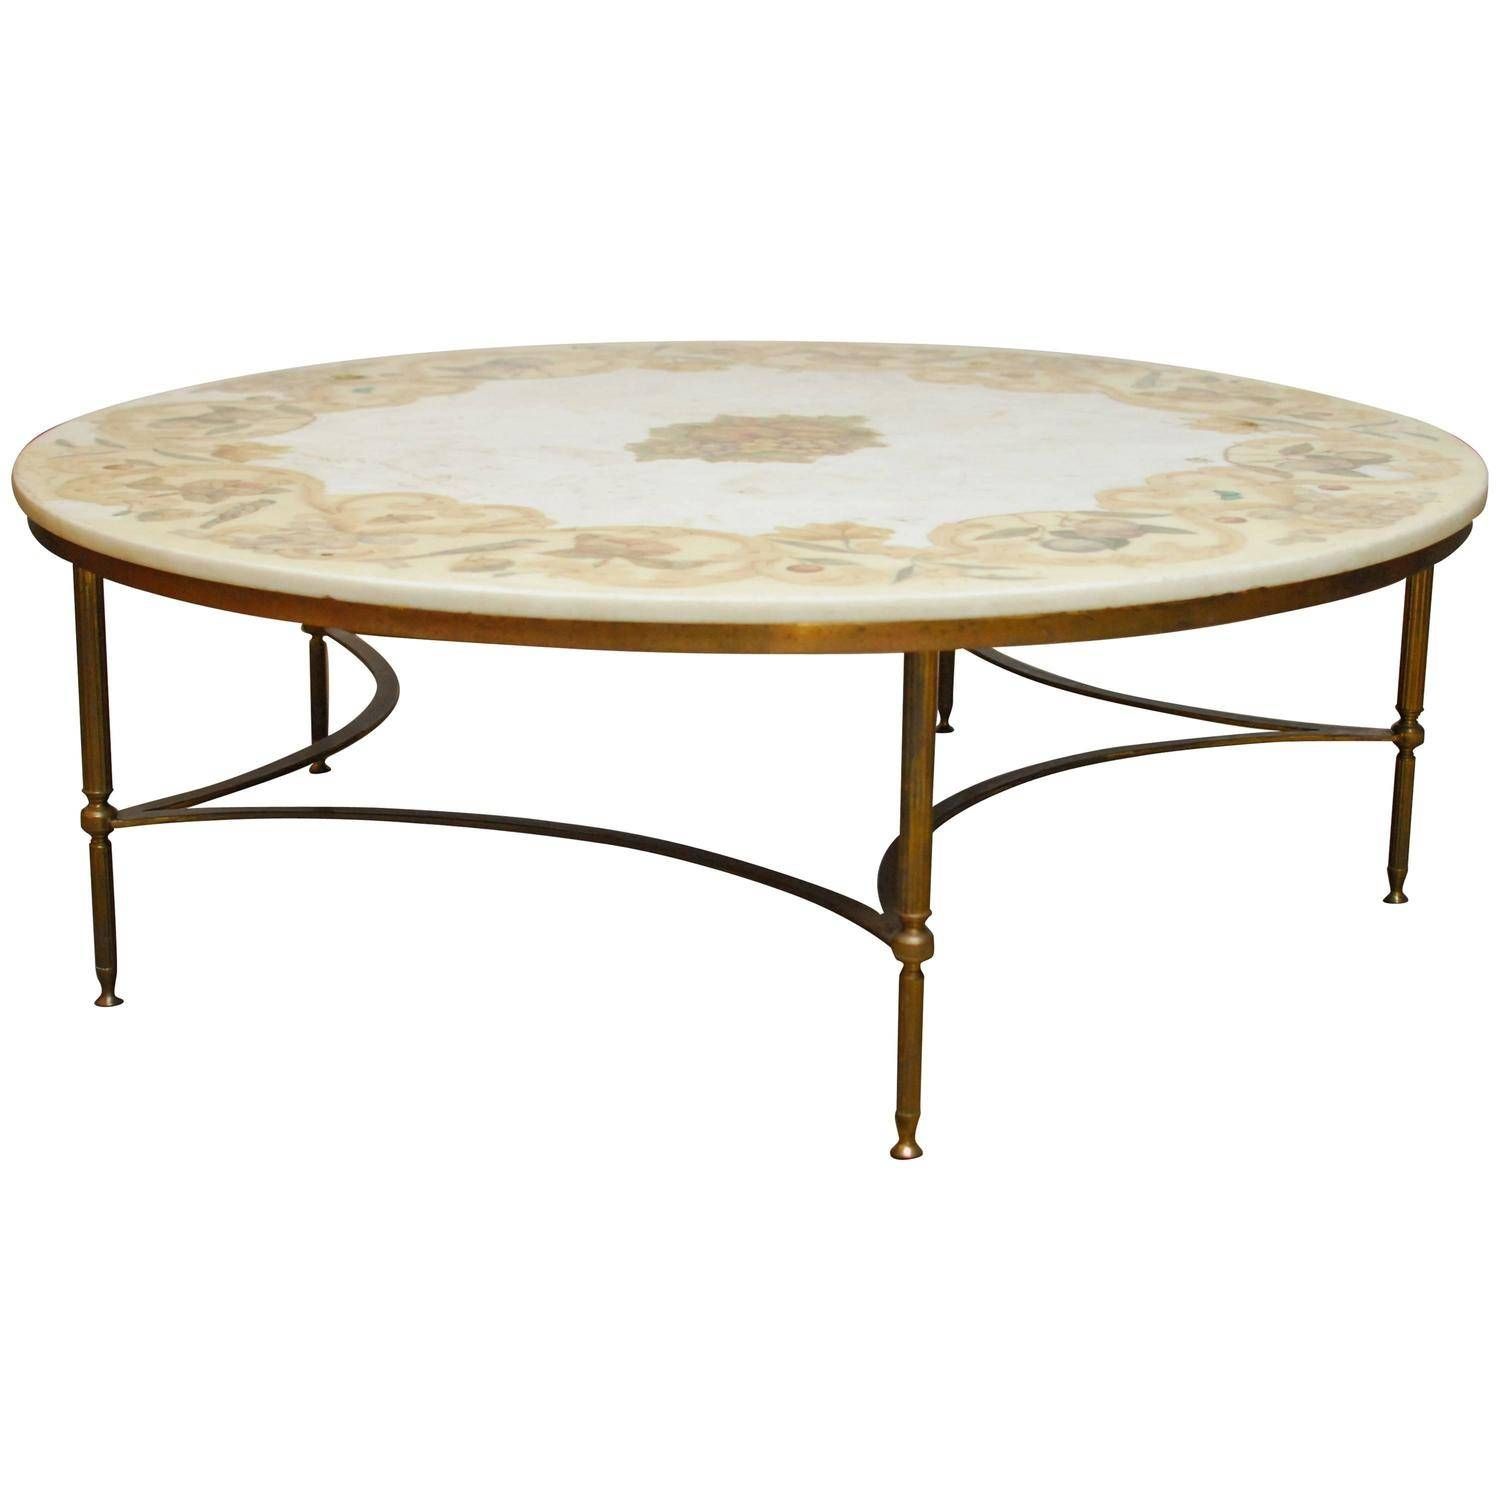 Florentine Marble And Brass Round Cocktail Coffee Table At 1stdibs With Regard To Marble And Metal Coffee Tables (View 14 of 30)